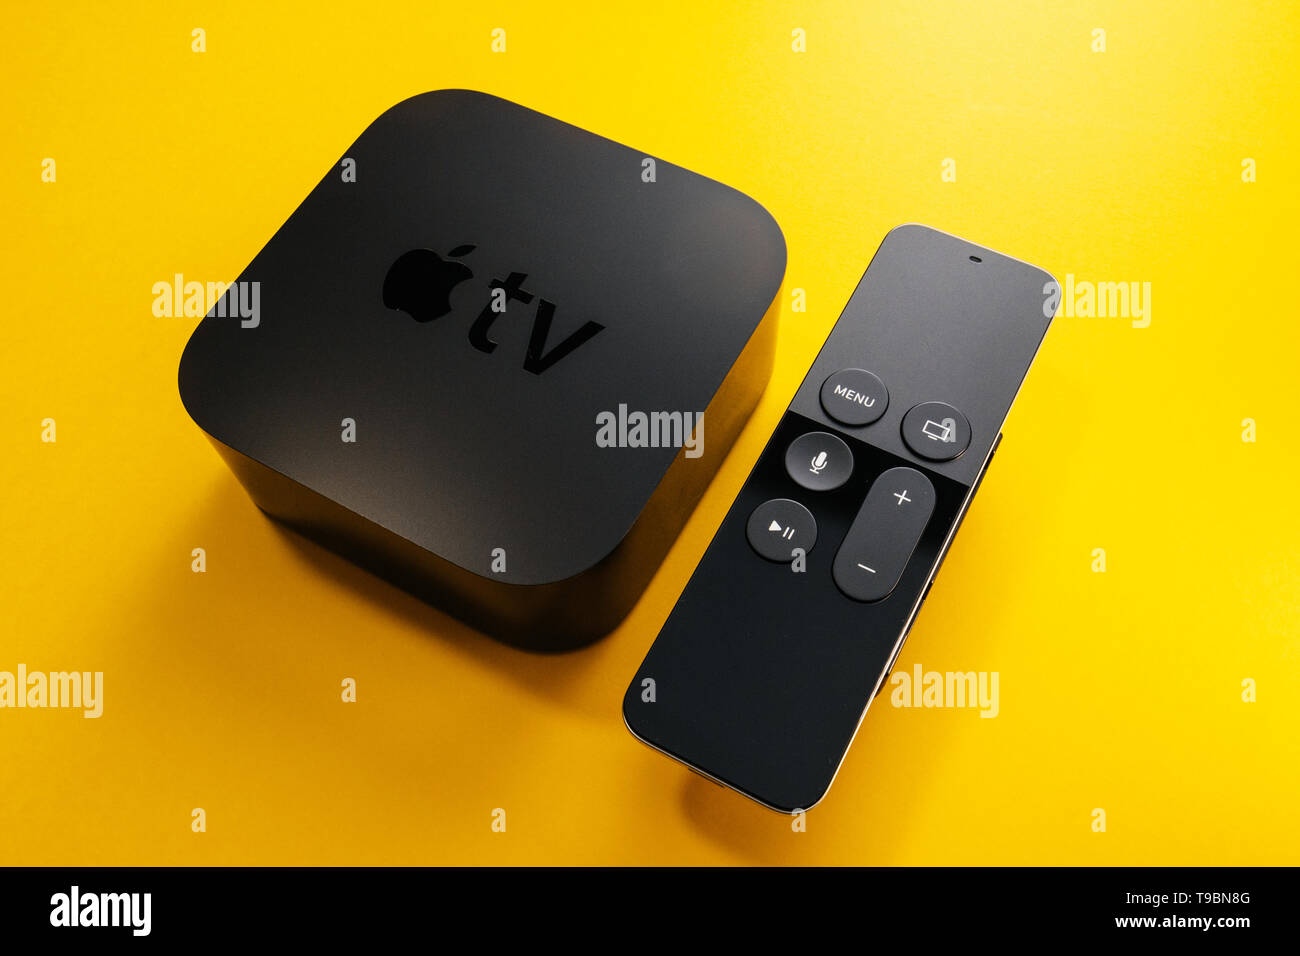 Paris, France - Nov 16, 2018: Side view of from above at black Apple TV 4K media streaming by Apple Computers against yellow background - tilt-shift lens used Stock Photo - Alamy